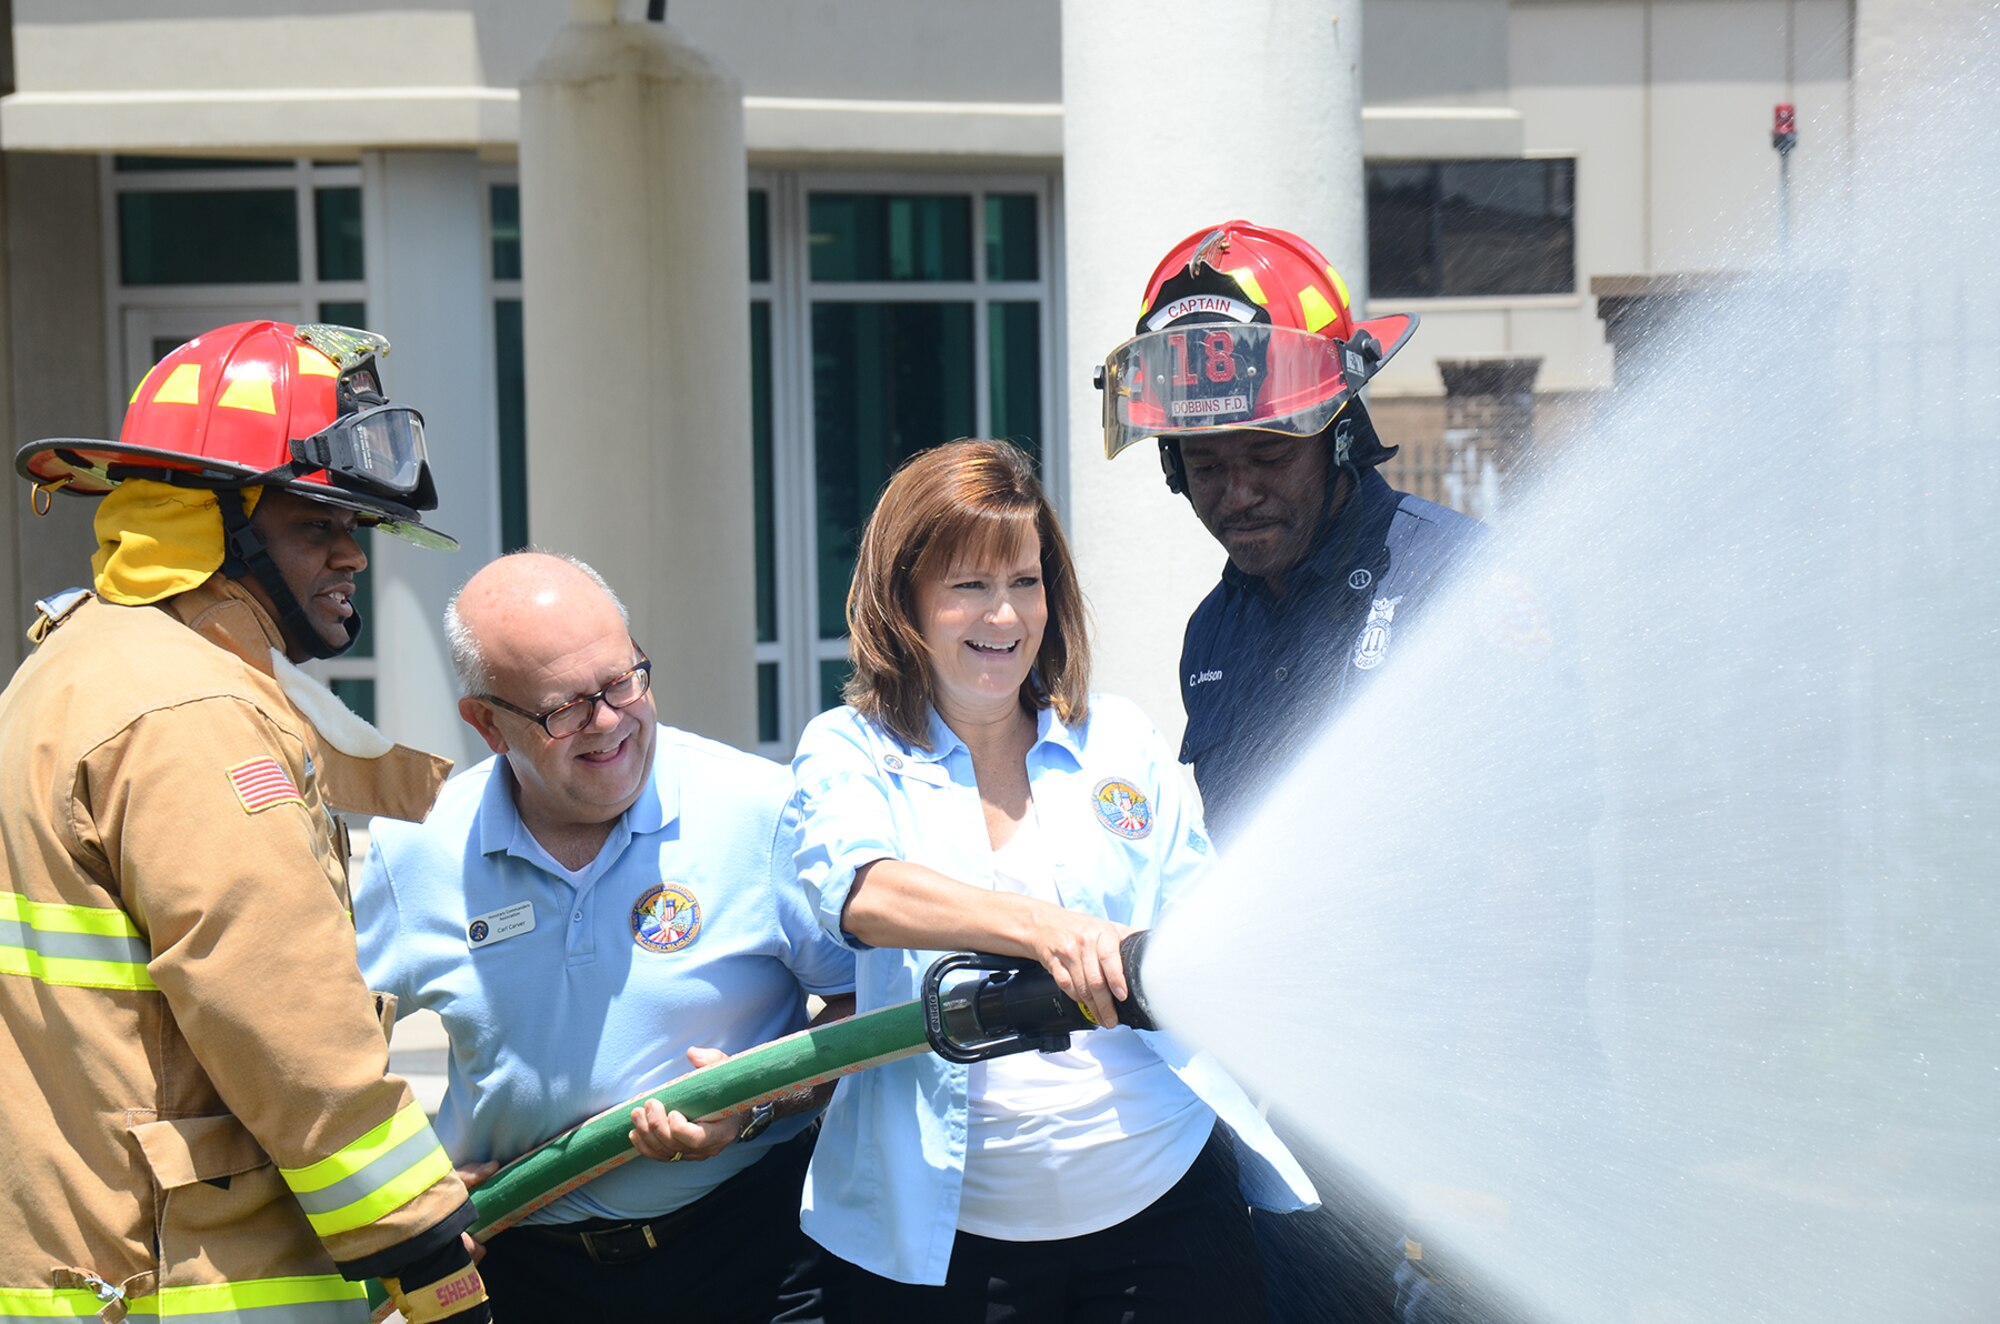 Rodney Long and Charles Judson of the Dobbins Fire Department give members of the Honorary Commanders Association Class of 2017 the opportunity to operate a fire hose during their annual "Dobbins Day" May 25, 2017 at Dobbins Air Reserve Base, Georgia. The HCA annually selects community and business leaders and pairs them with military commanders in a yearlong program, giving the leaders the opportunity to learn more about local military activities, their impact on our economy and various aspects of the national defense system. (U.S. Air Force photo/Don Peek)